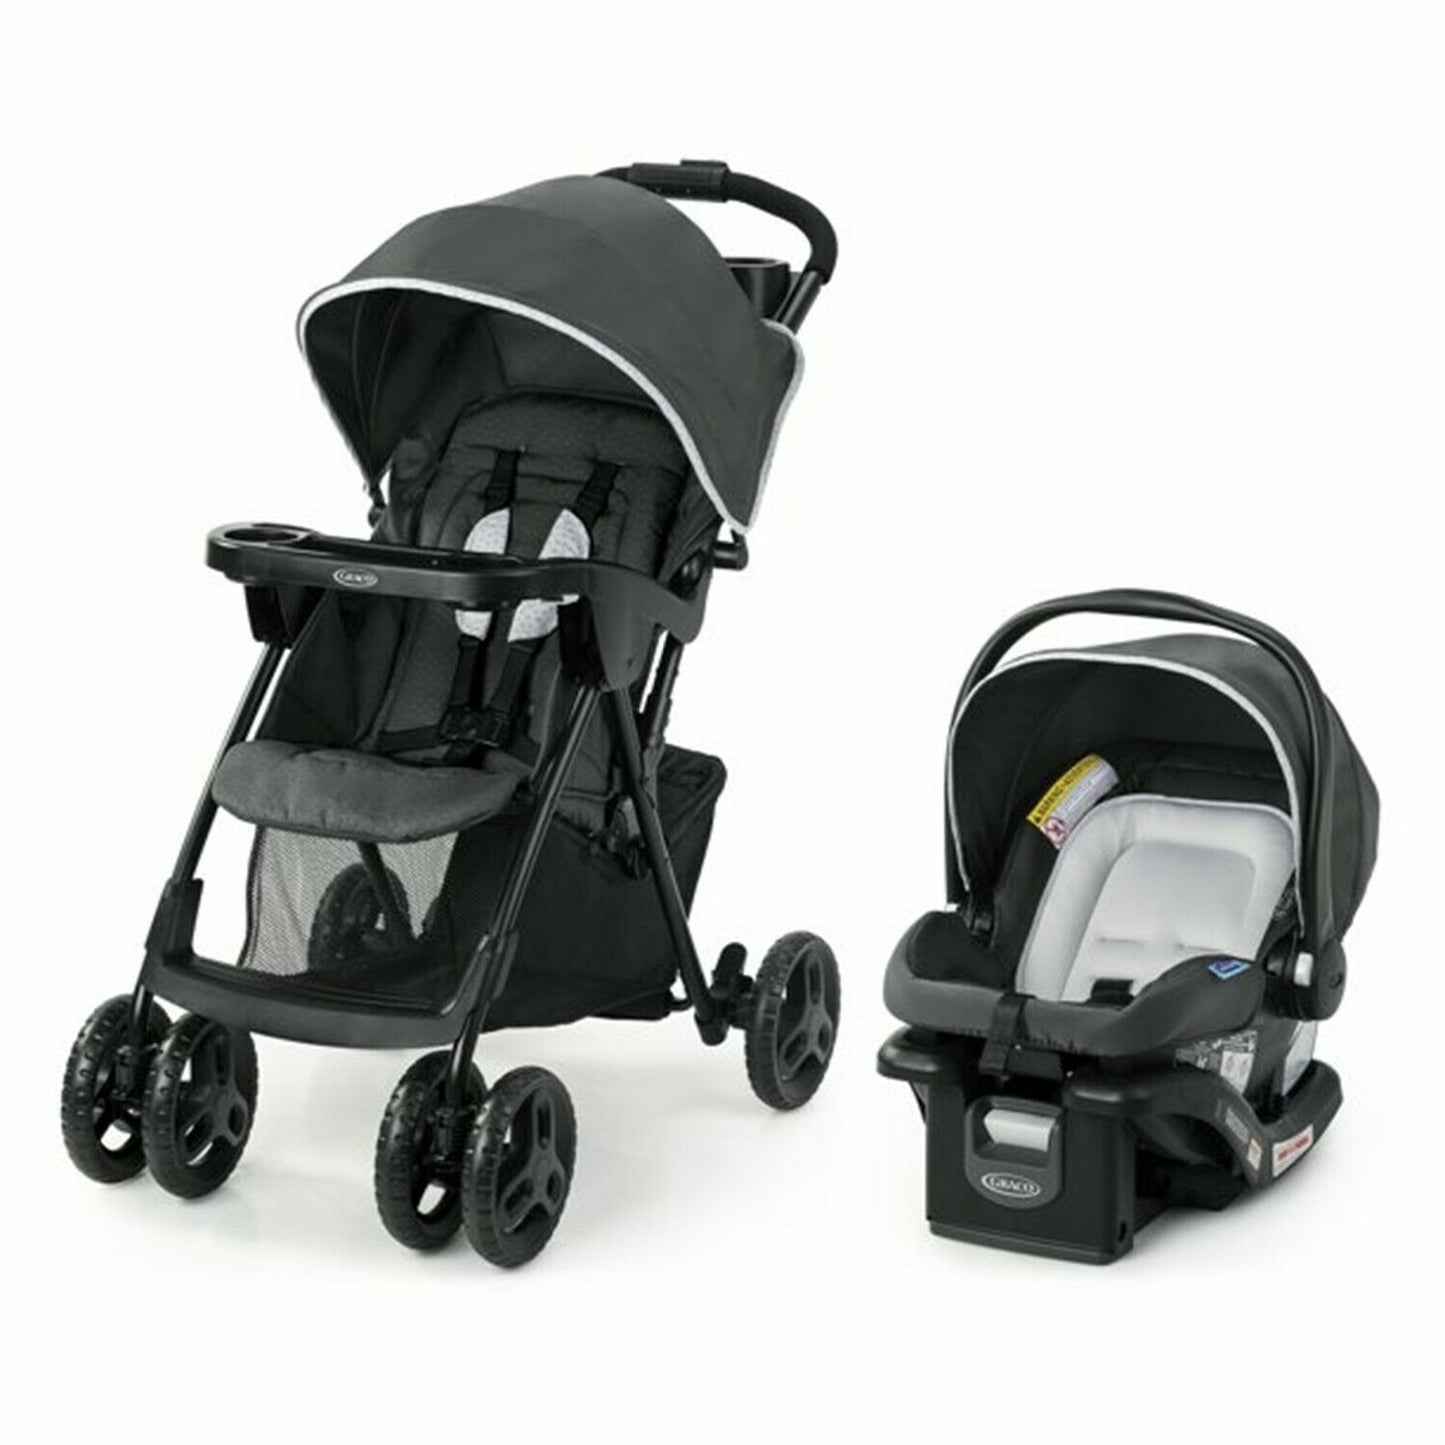 Baby Stroller with Car Seat Travel System Playard High Chair Diaper Bag Combo